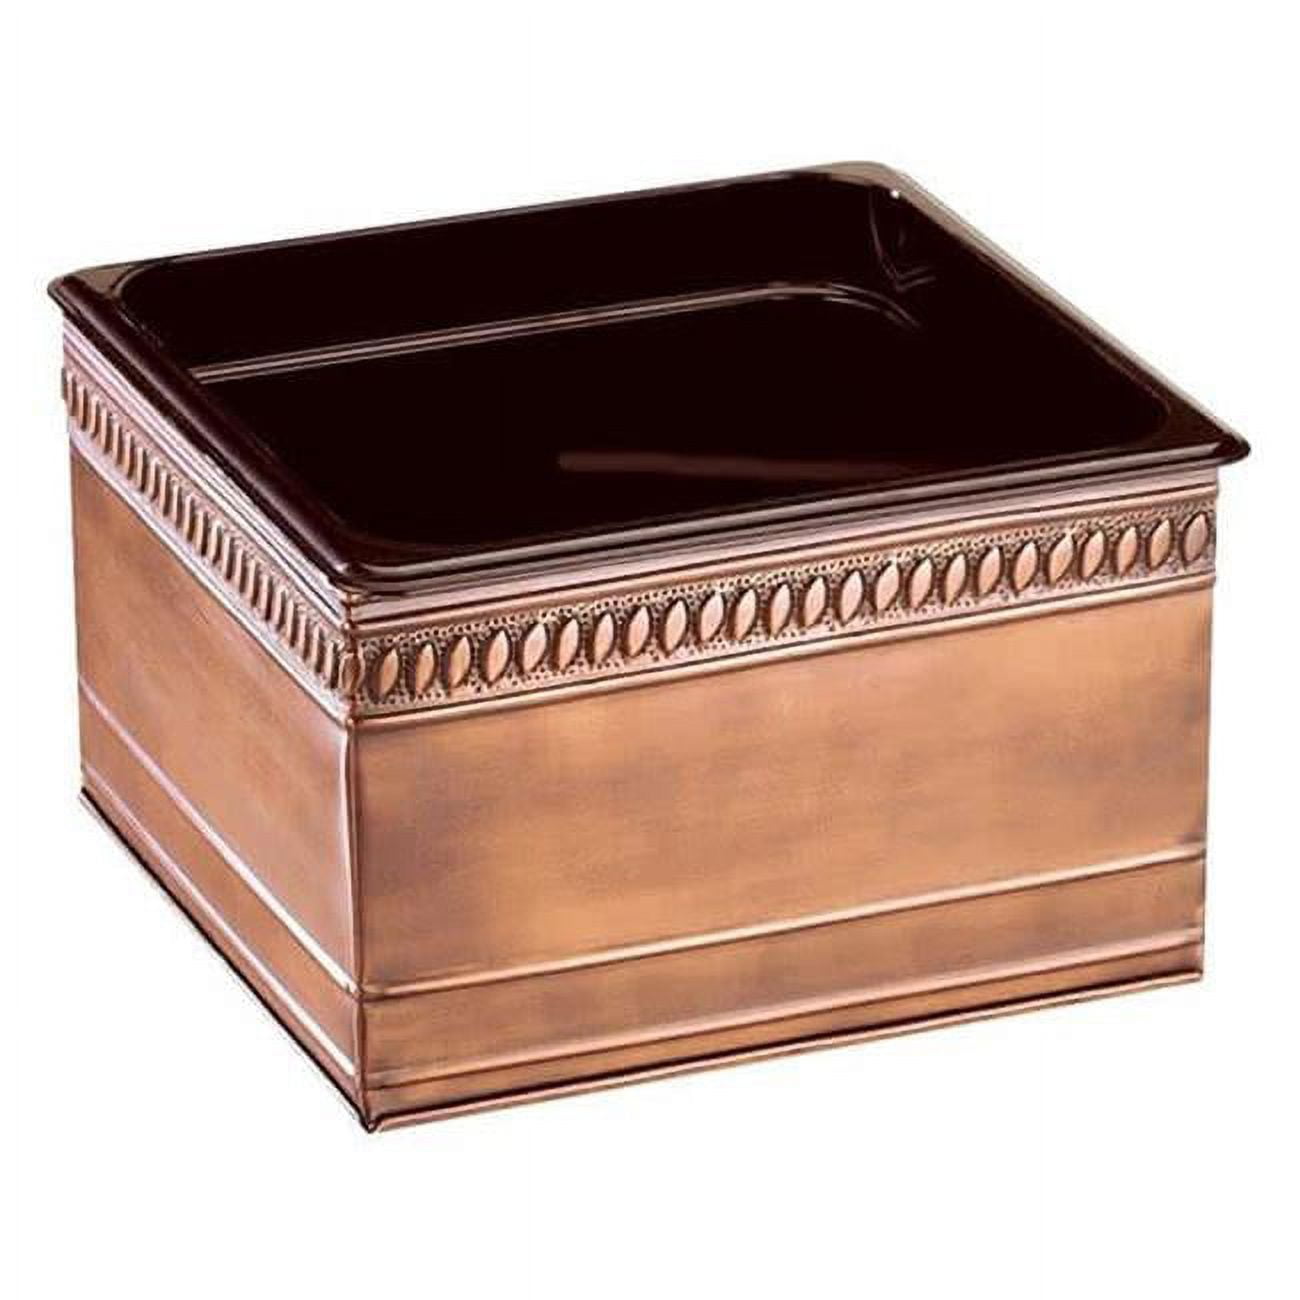 Picture of Cal Mil 475-6-51 Copper Ice Housing with Clear Pan - 6 x 7 x 6.5 in.